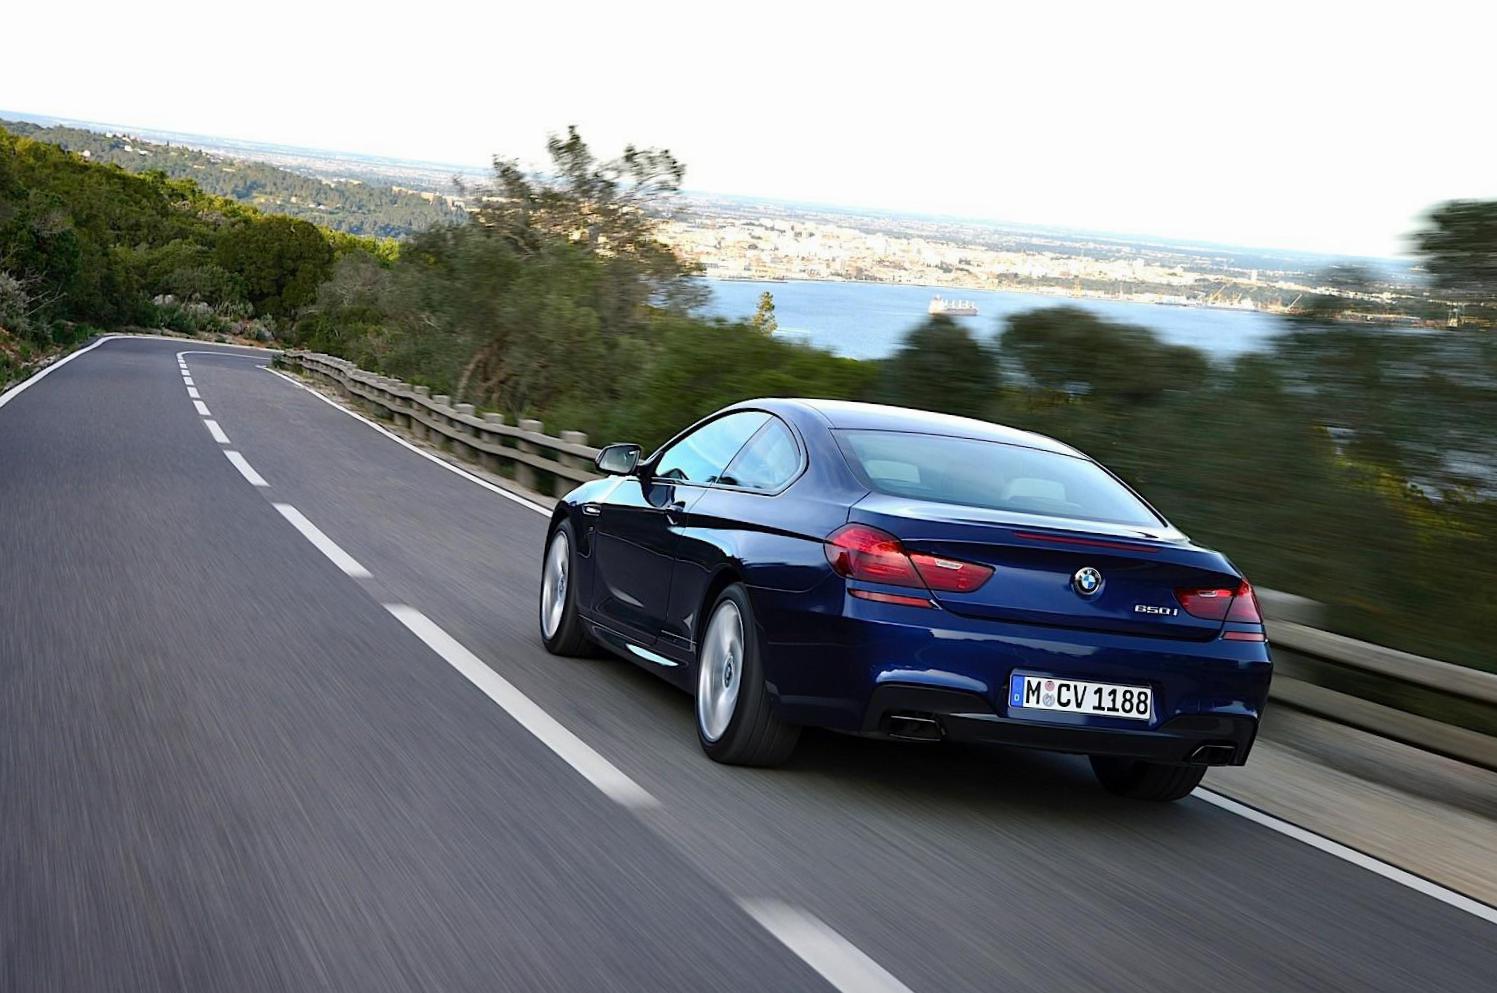 BMW 6 Series Coupe (F13) price coupe